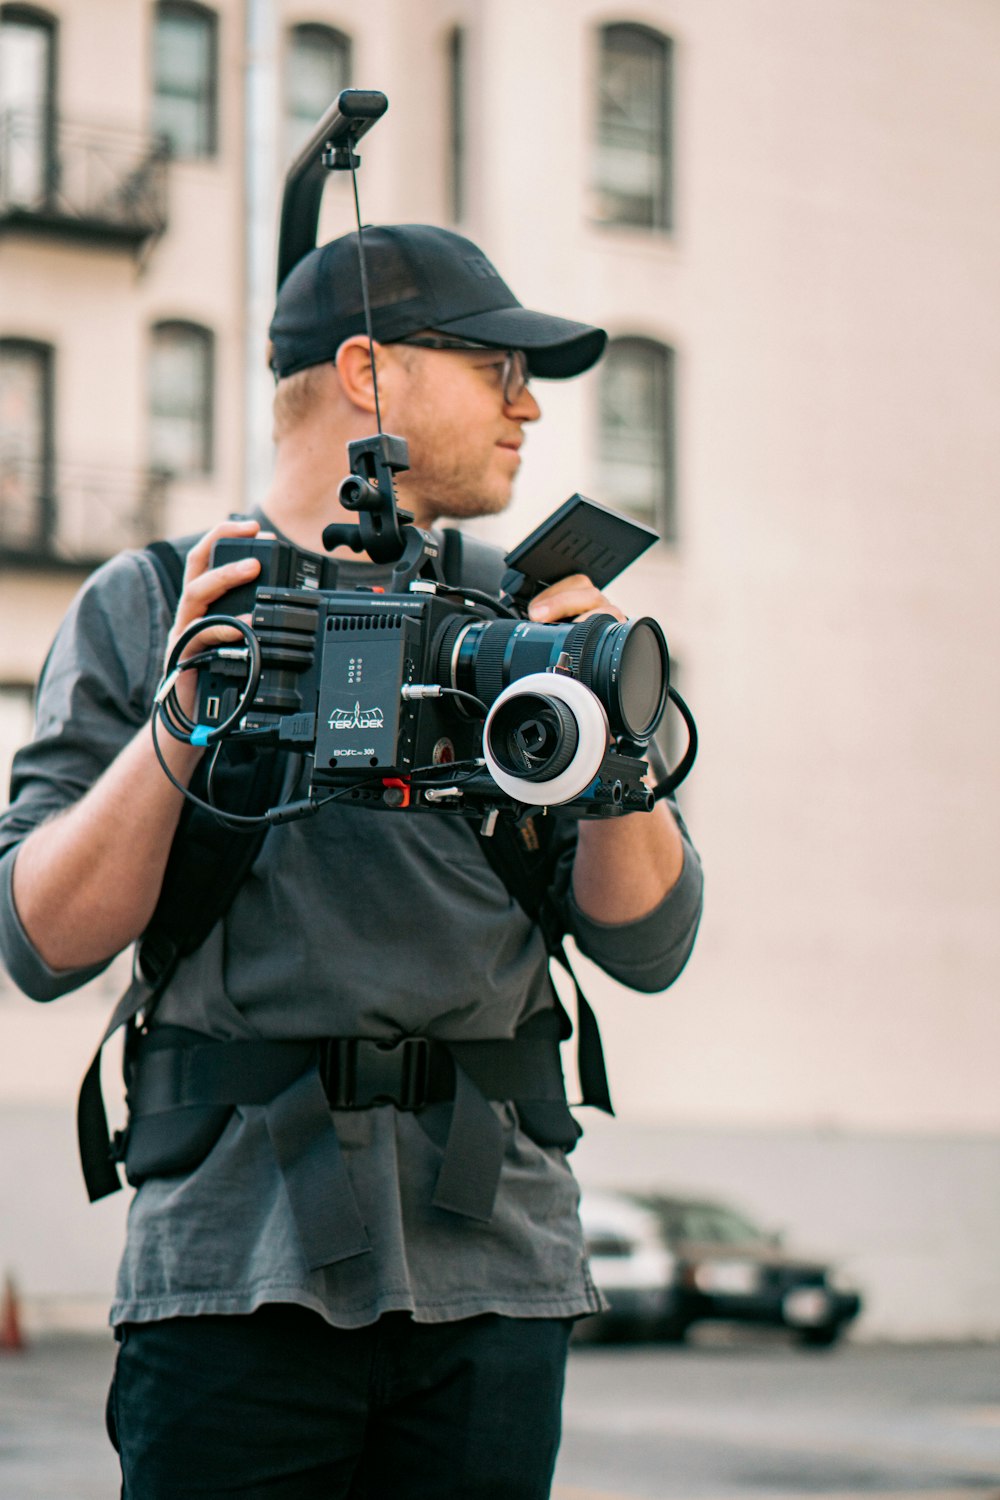 man in black and gray camouflage uniform holding black dslr camera